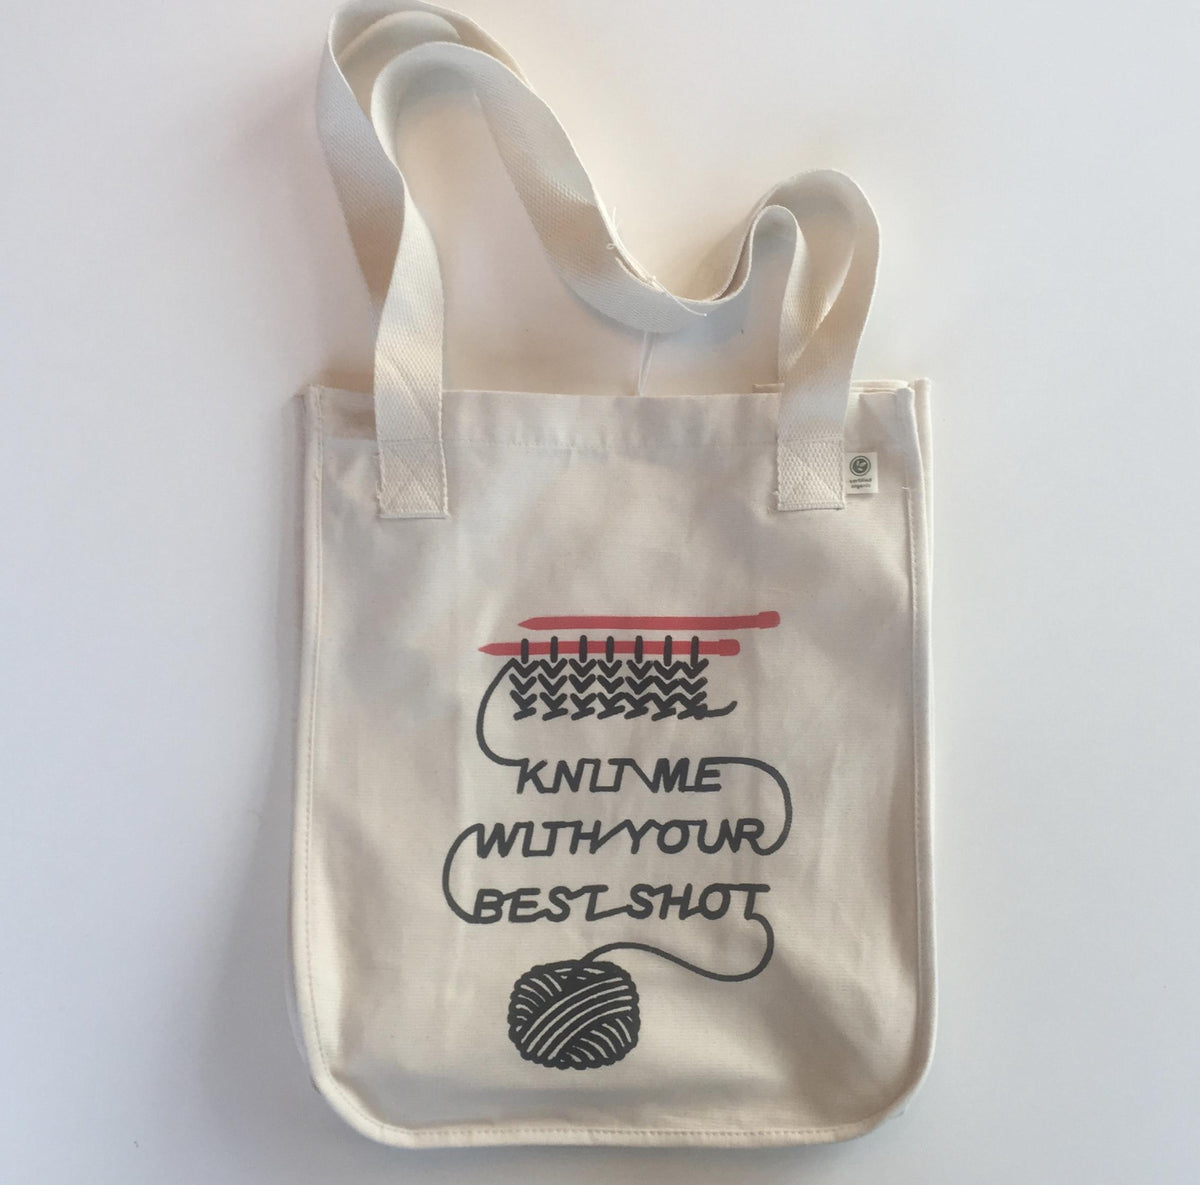 Knit Me With Your Best Shot Tote